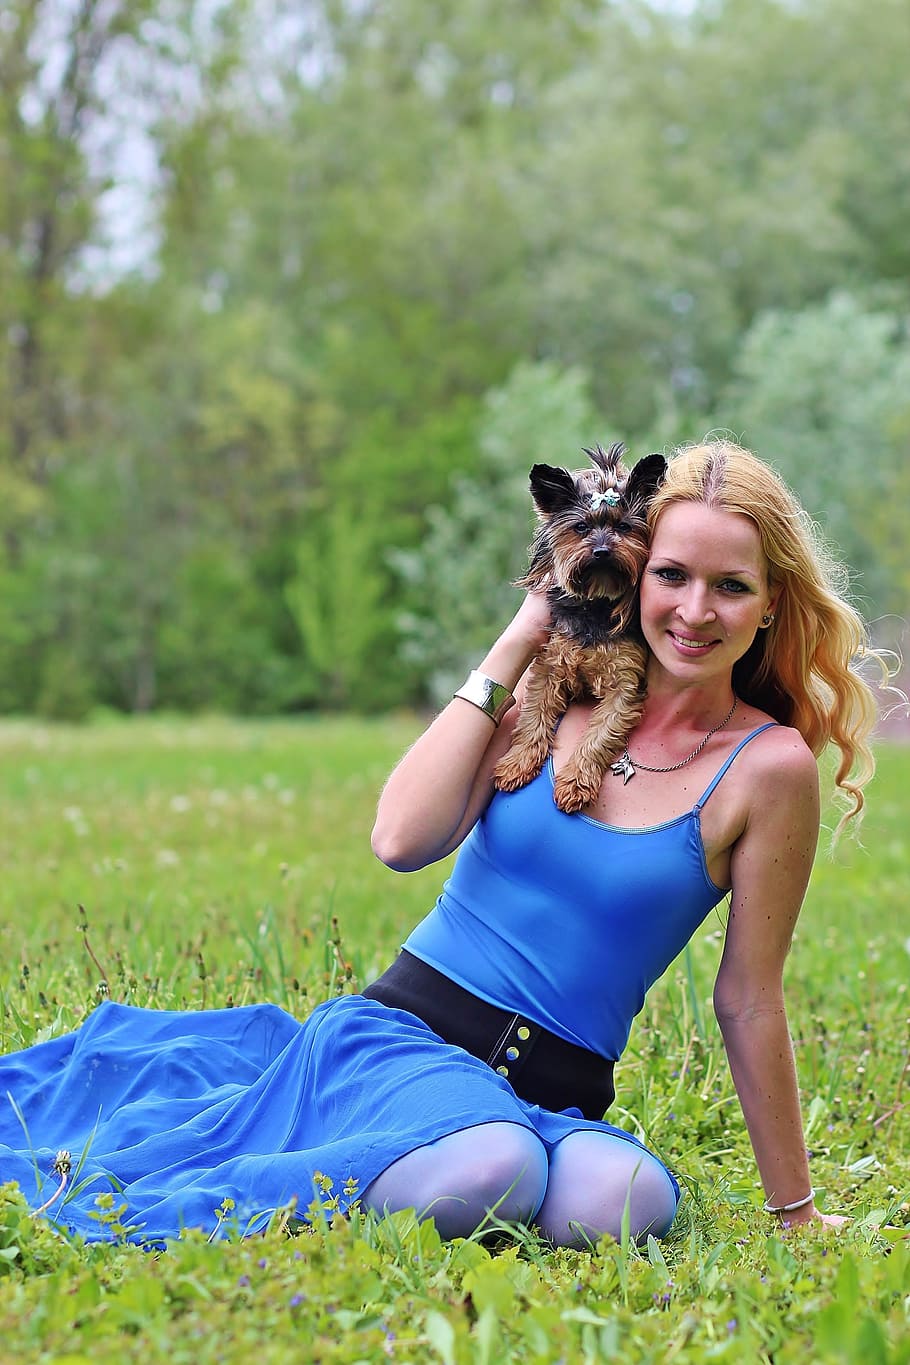 smile, yorkie, dogs, blonde woman, lie, beauty, dream, green grass, spring, outdoors